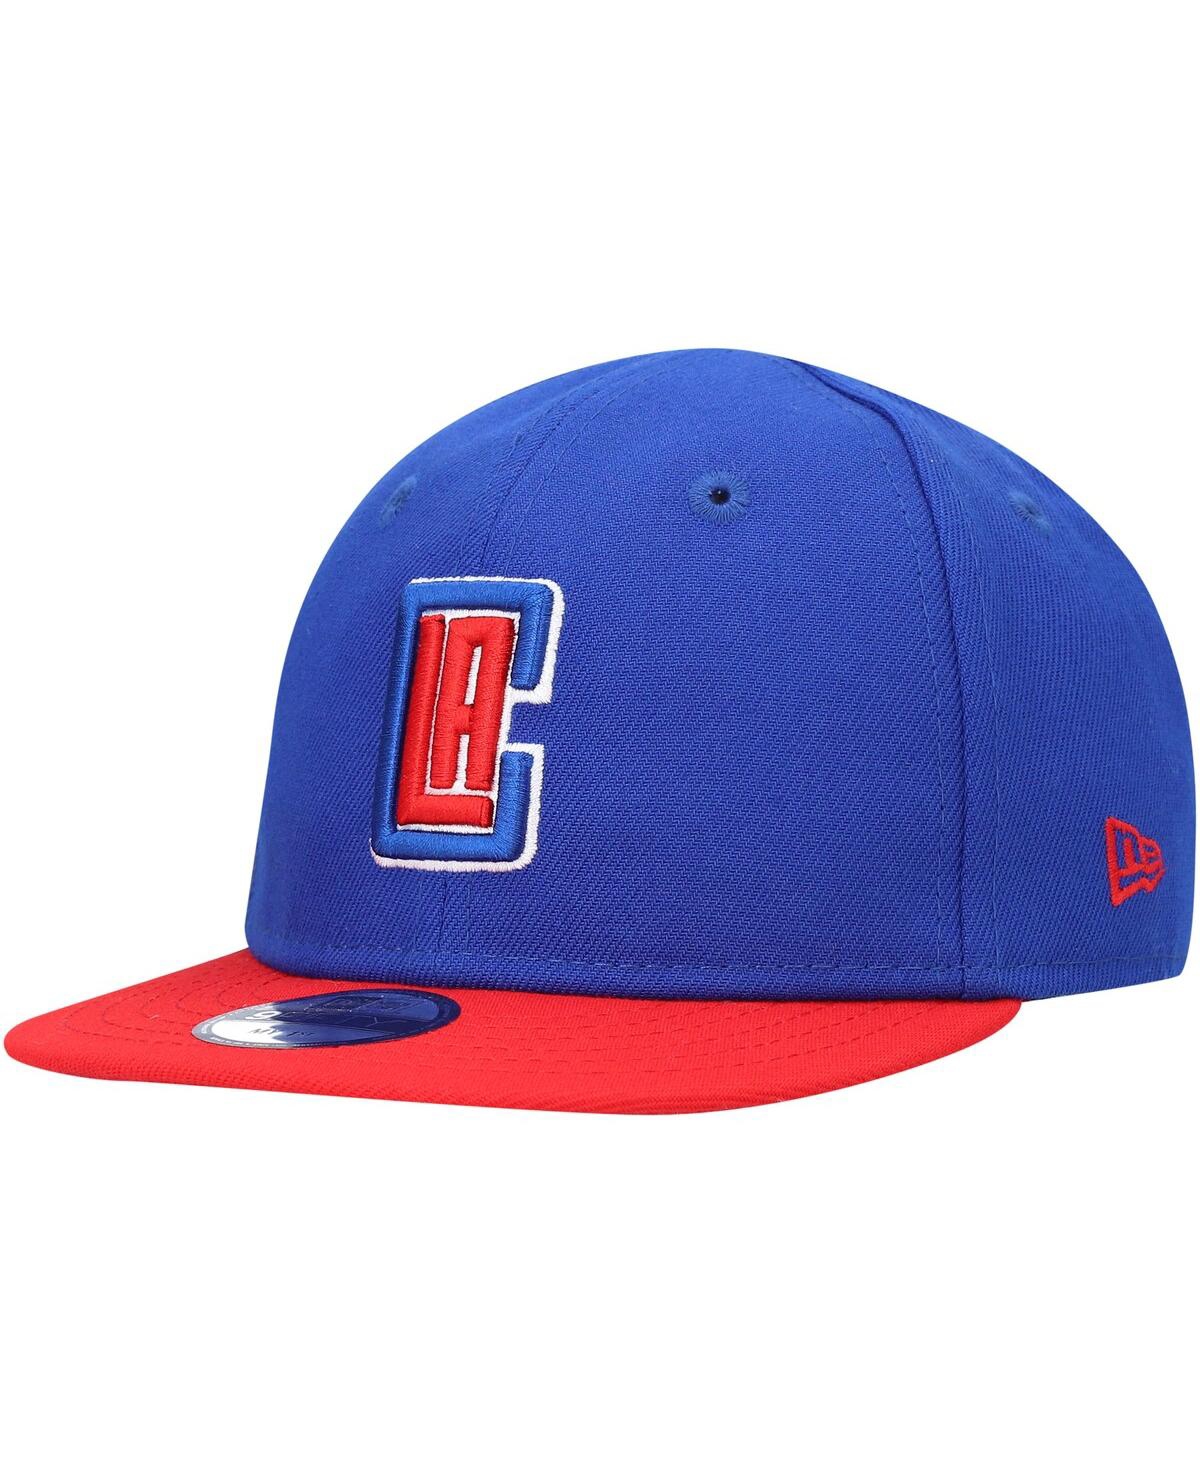 New Era Babies' Infant Unisex  Royal, Red La Clippers My 1st 9fifty Adjustable Hat In Royal,red